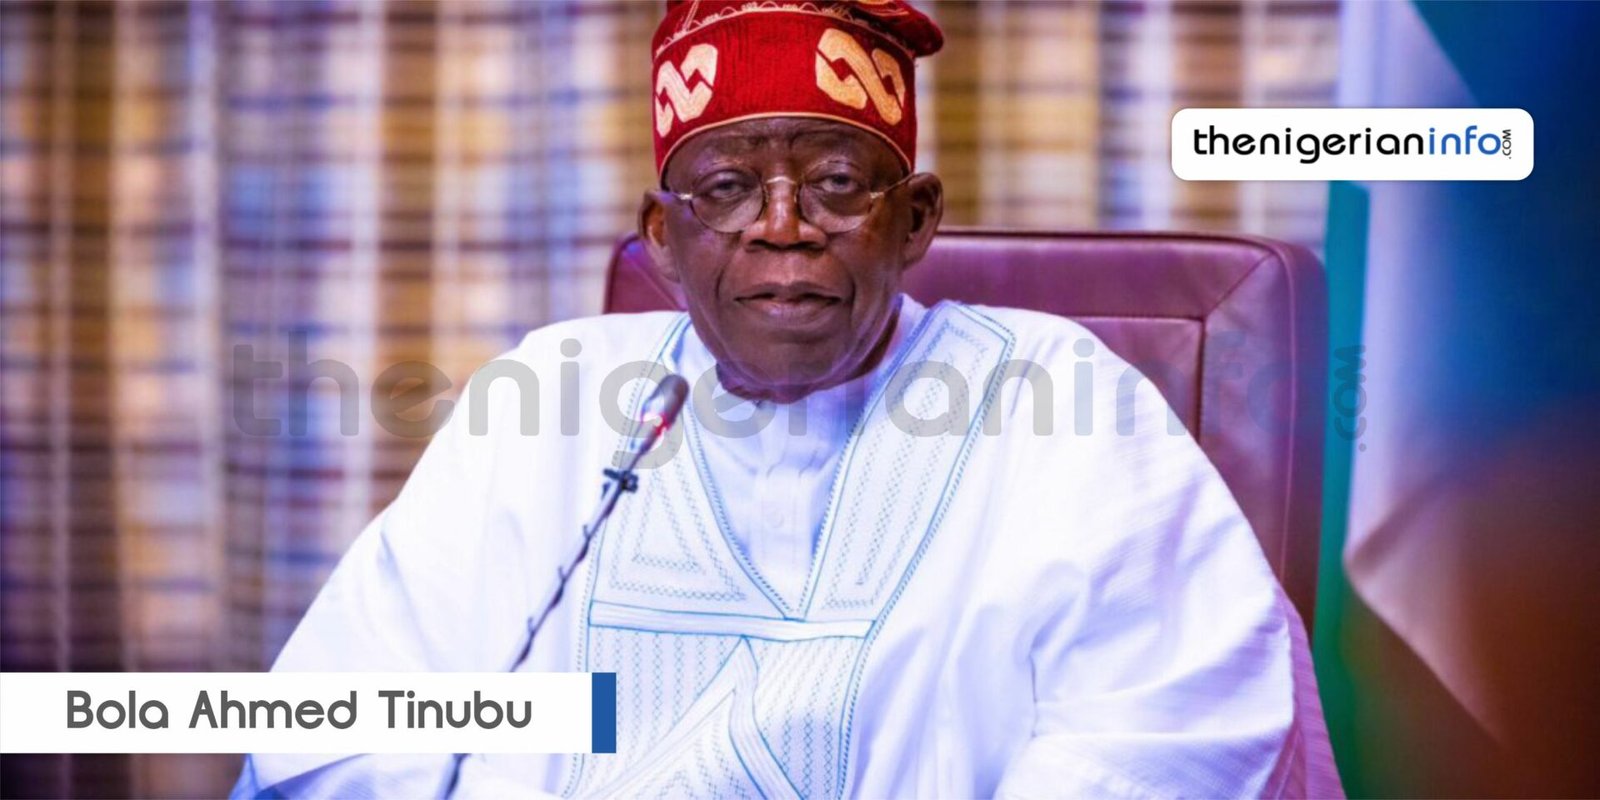 richest-men-in-lagos-state-Bola-ahmed-tinubu